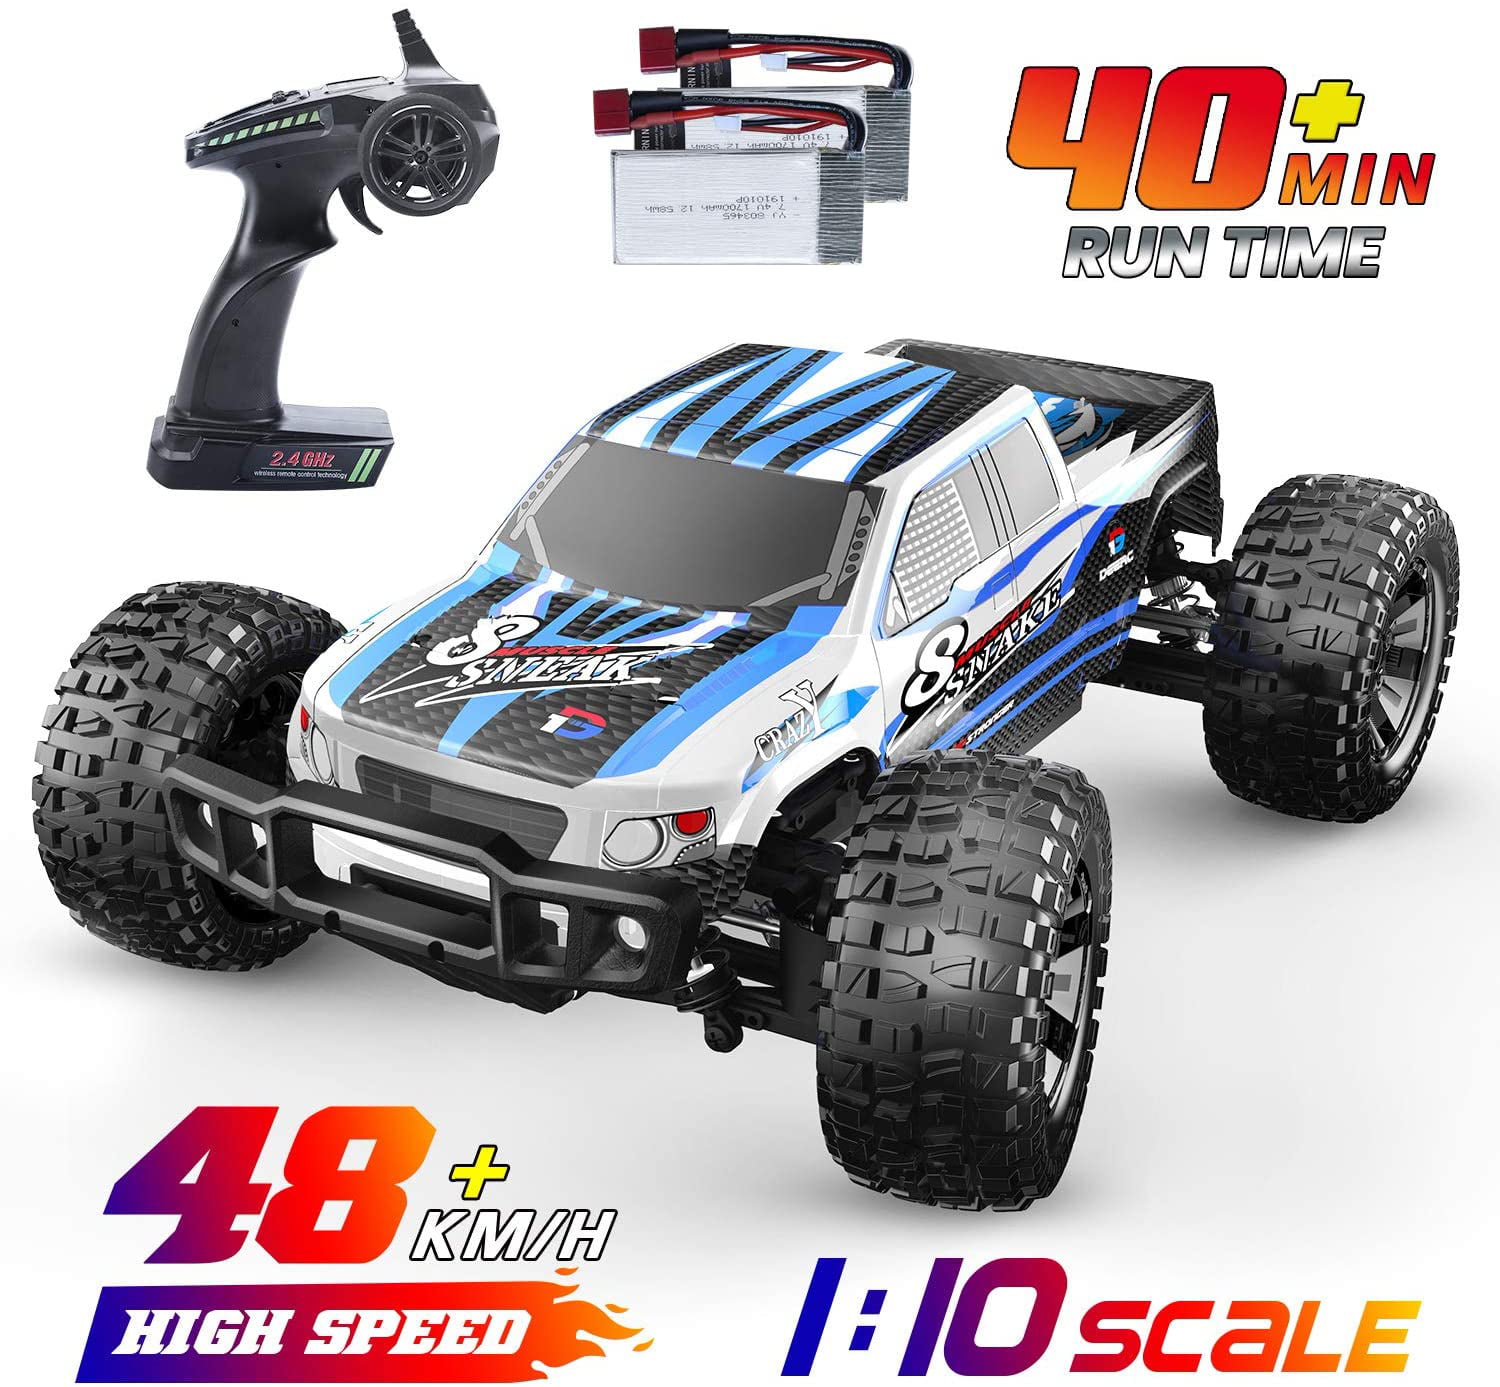 DEERC Spare Parts Kits for 9200E 1:10 Scale Large High Speed Remote Control Car